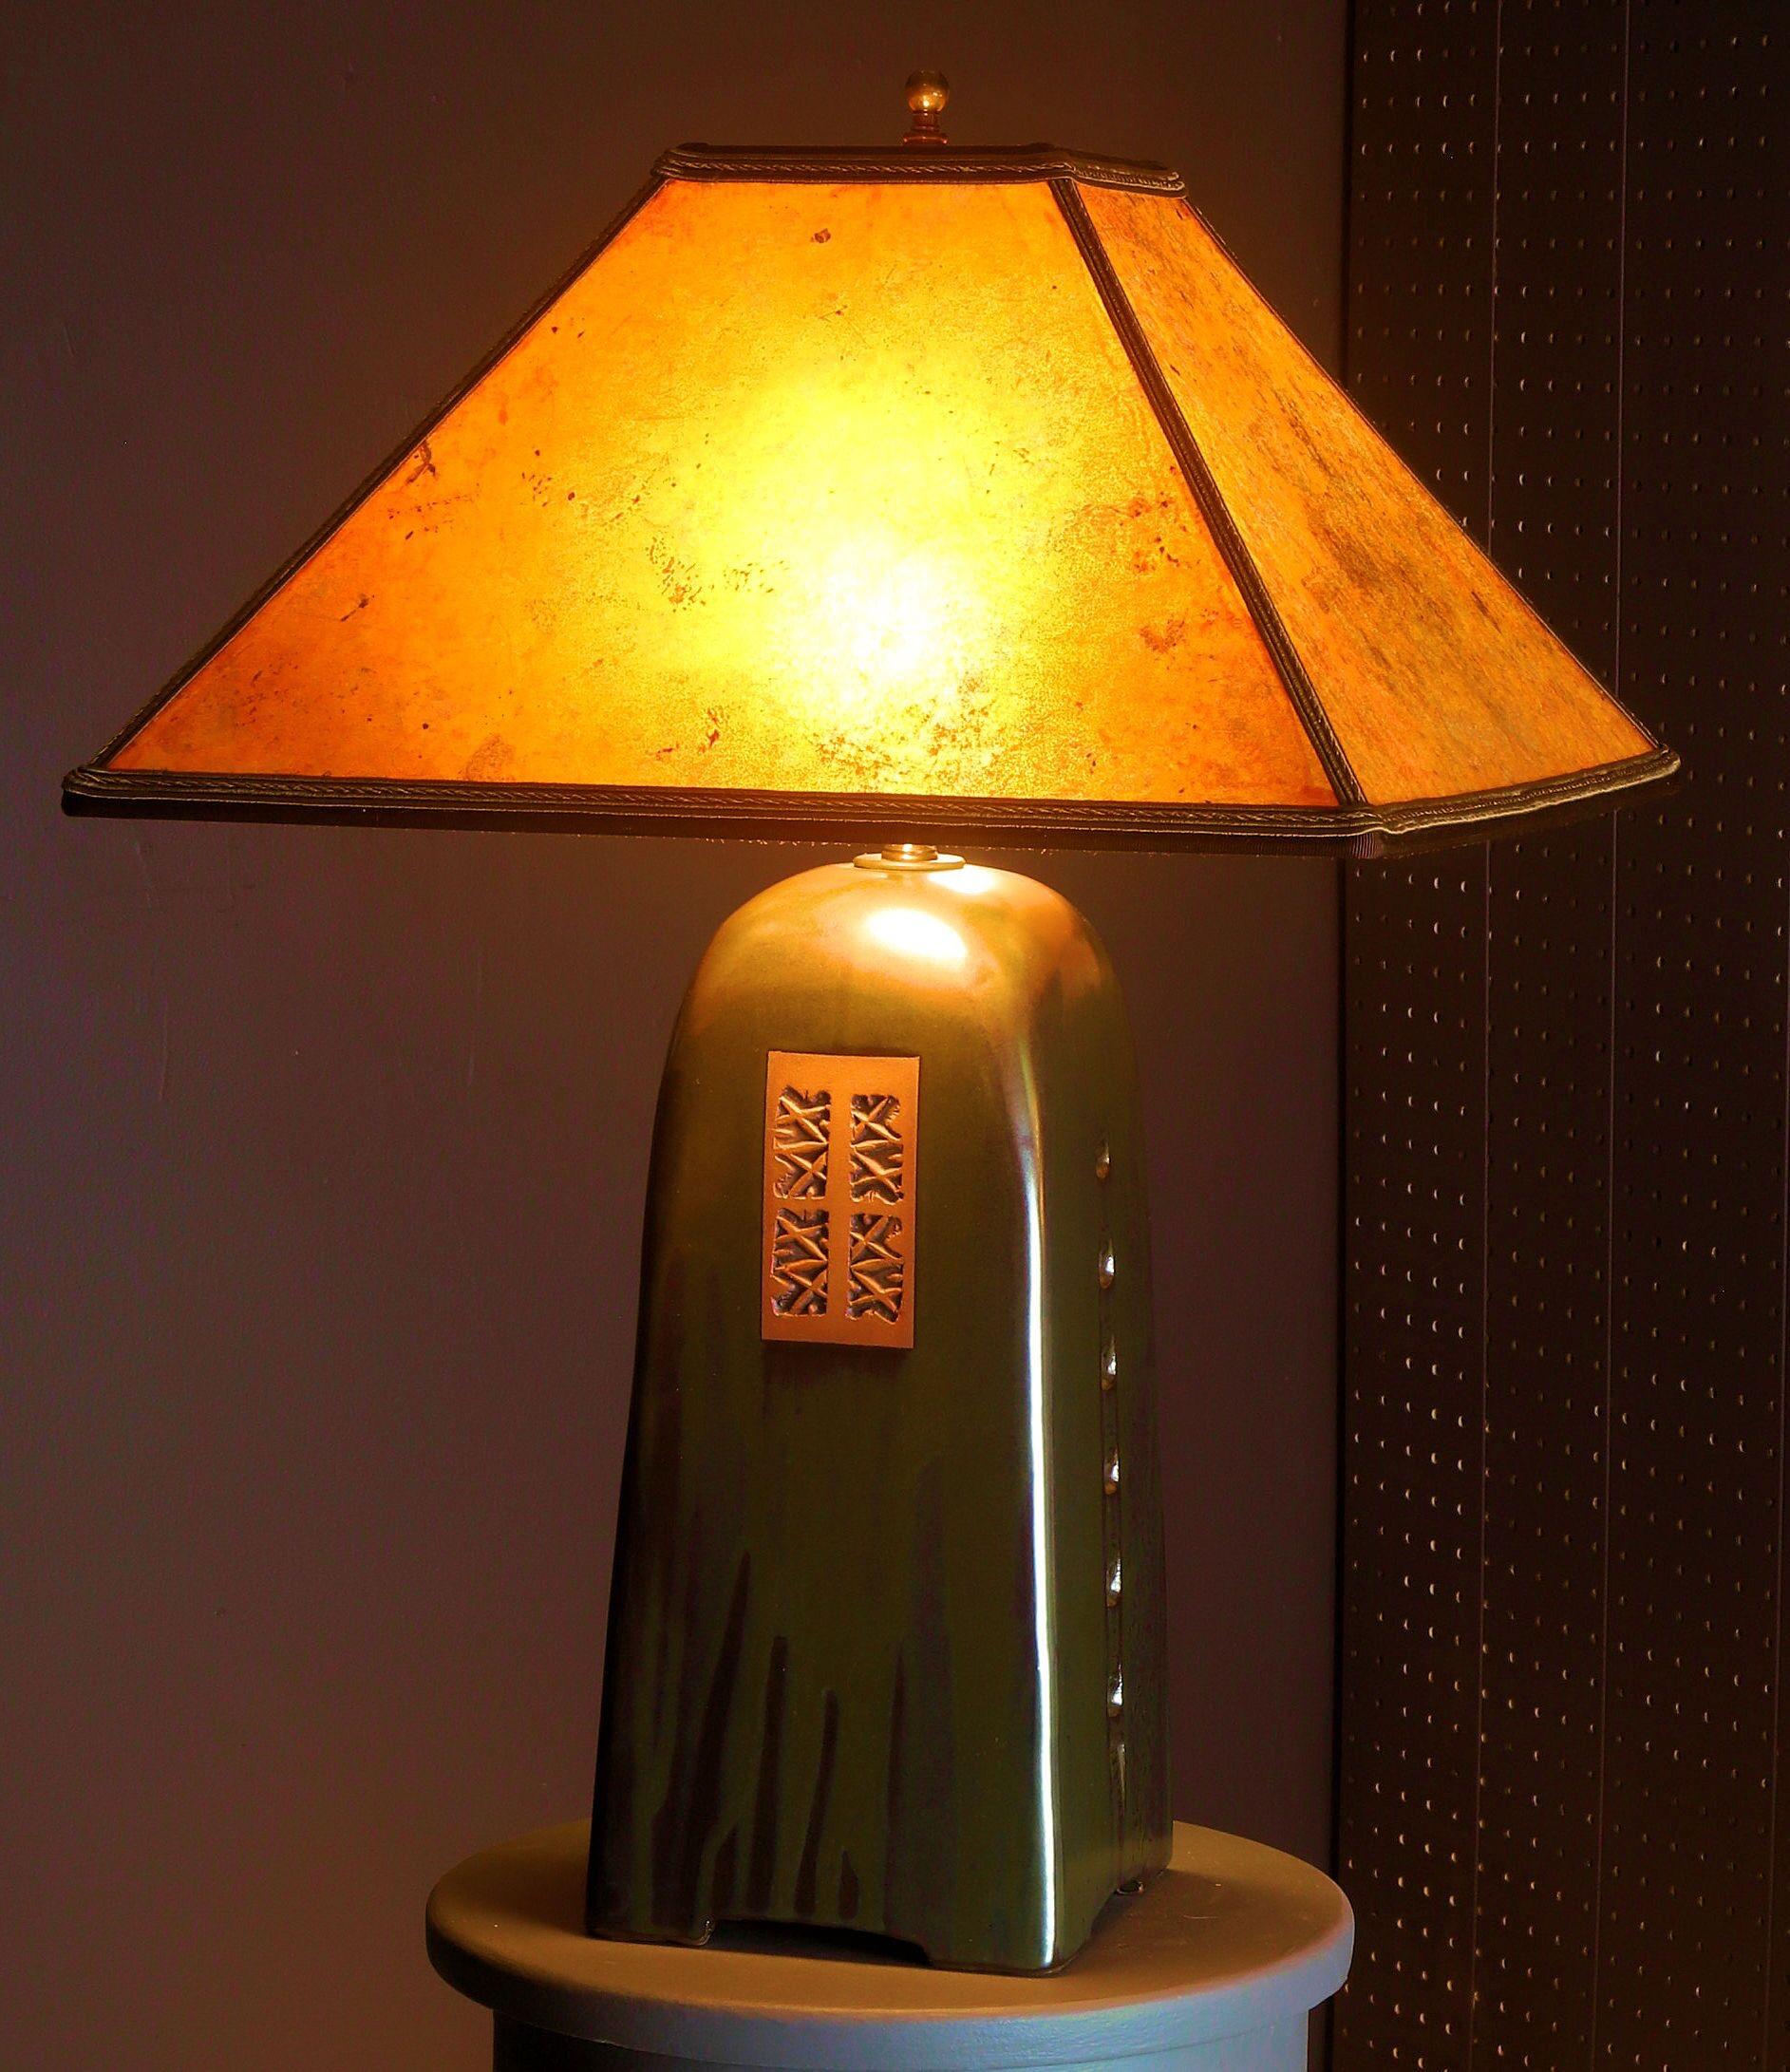 Beautiful handmade stoneware lamp by renowned artist Jim Webb. This is the North Union collection lamp in onyx glaze with amber mica shade.
Dimensions: Footprint 6 in x 6 in
Height of base without hardware 12.75 Total height to top of finial